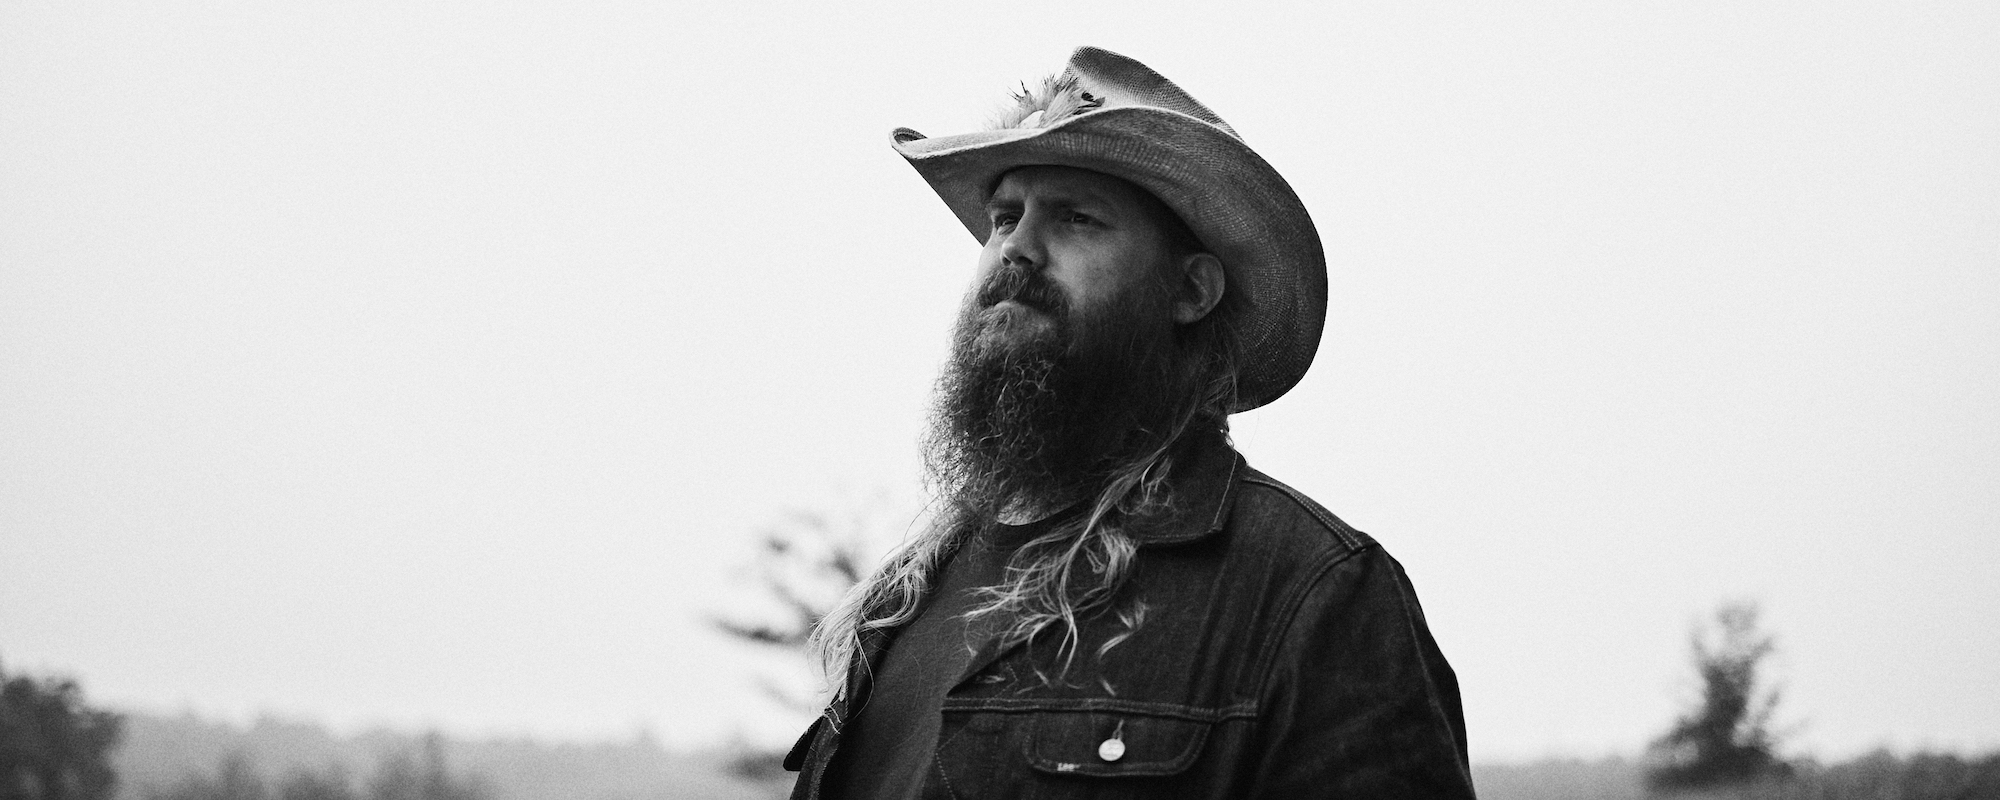 Chris Stapleton Drops Fiery New Track “Think I’m In Love With You”